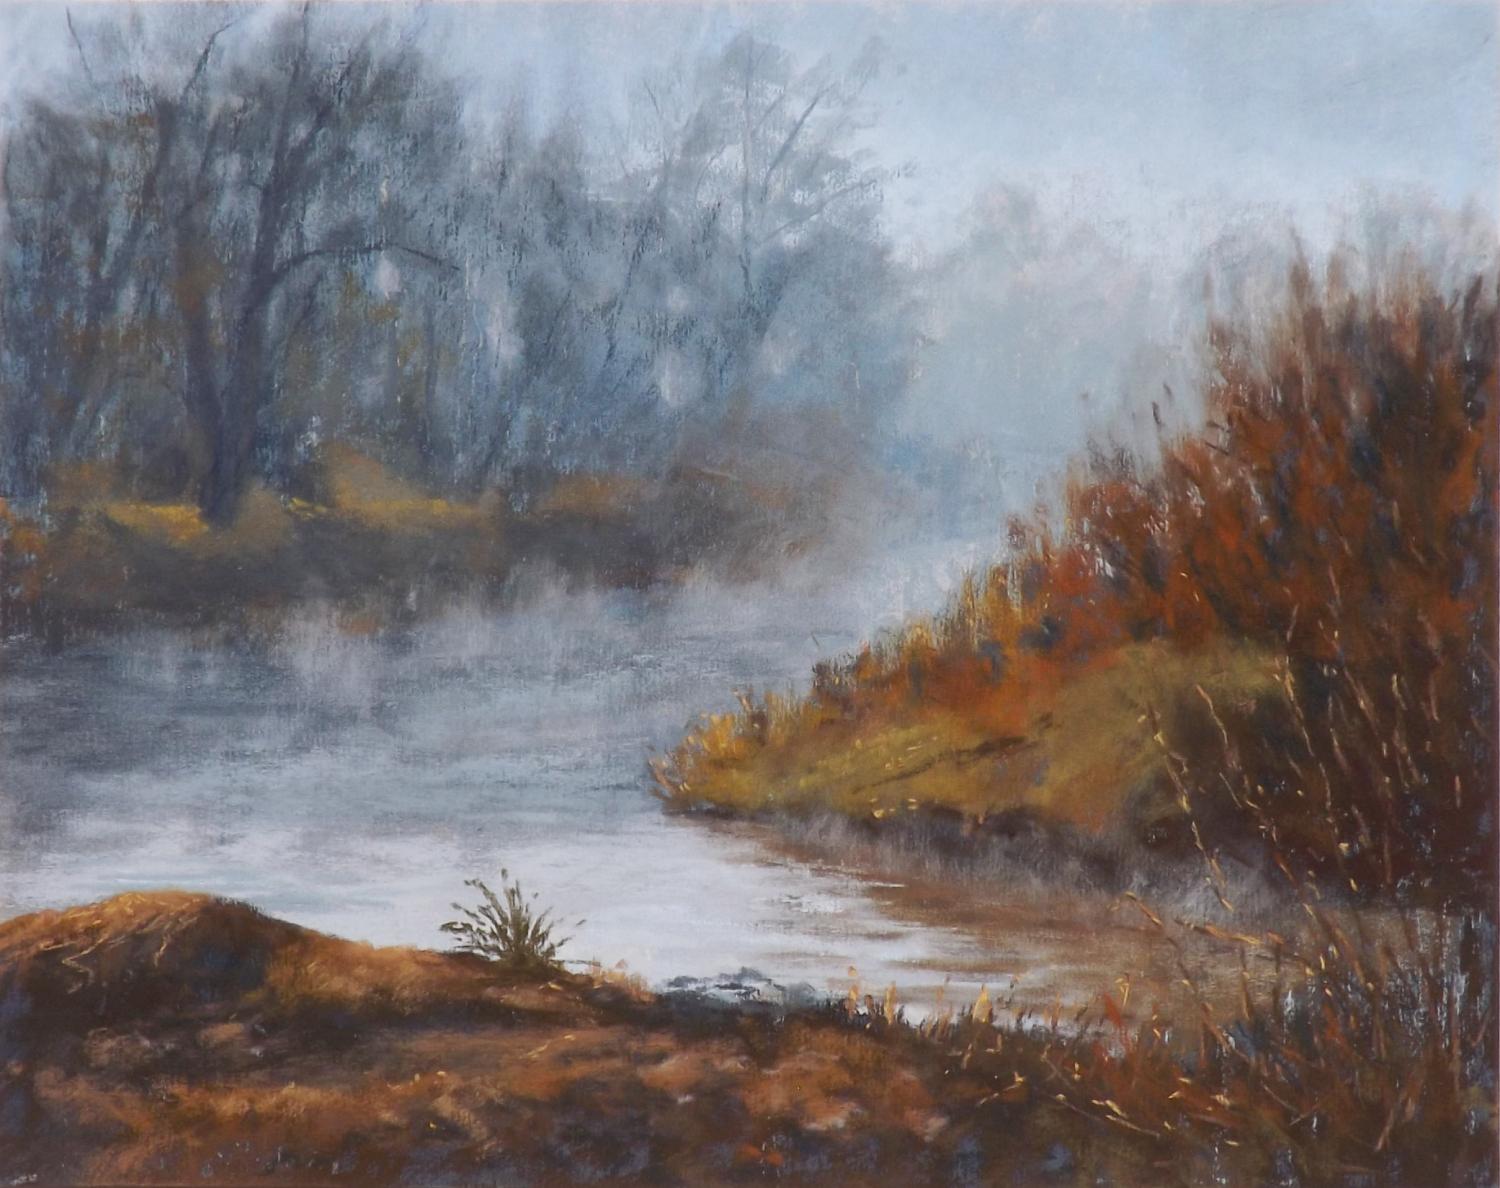 The Quiet of the River Fog, Original Painting - Art by Patricia Prendergast